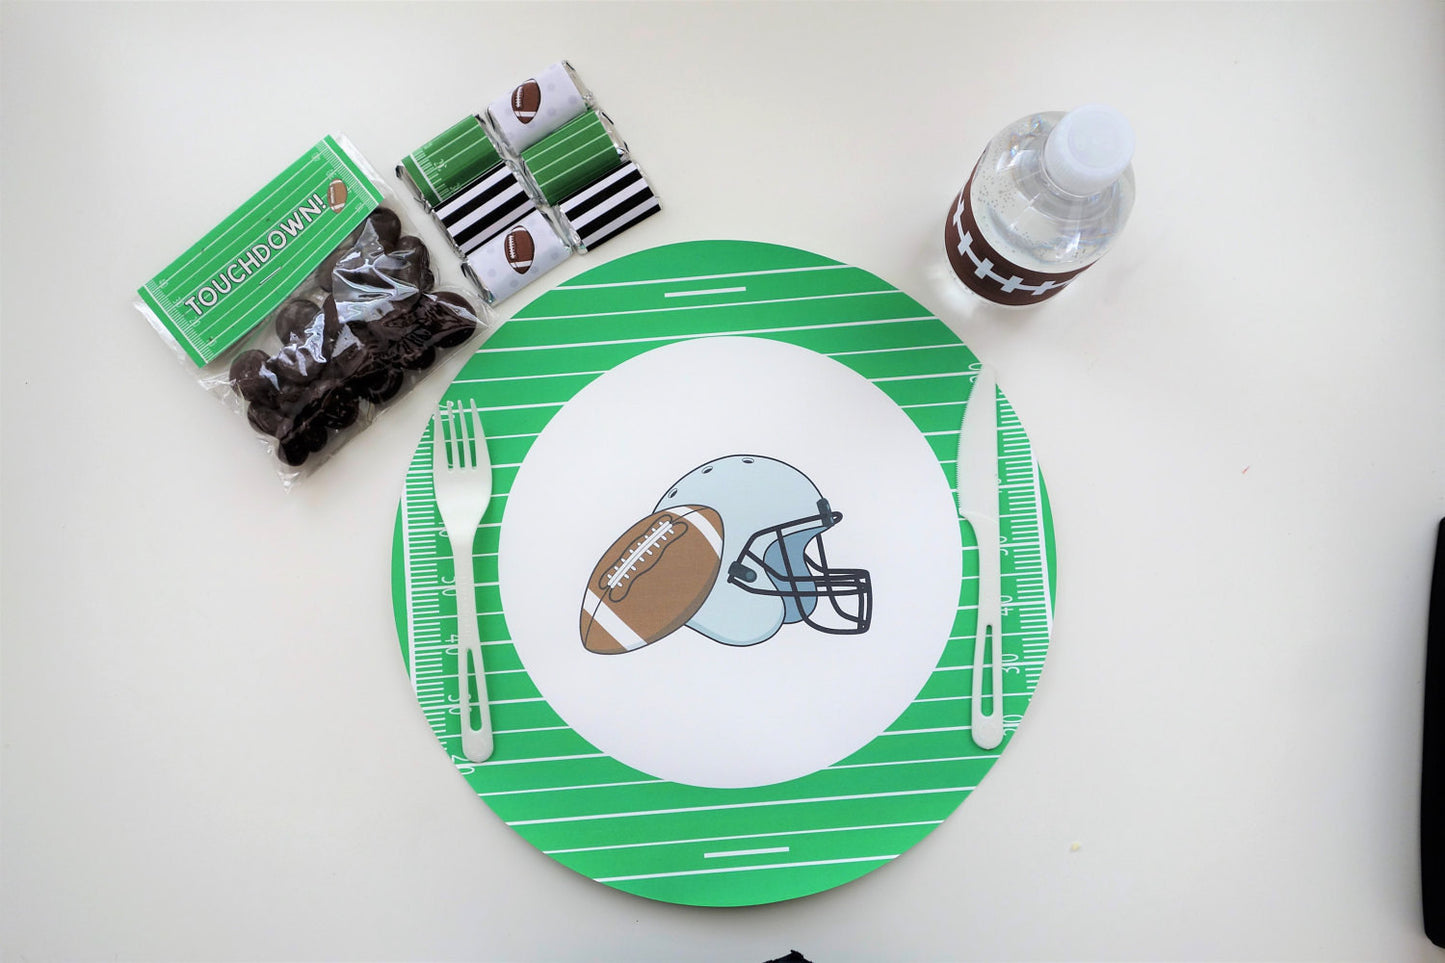 Football-themed Placemats (8-pack, 100% Cotton Paper)